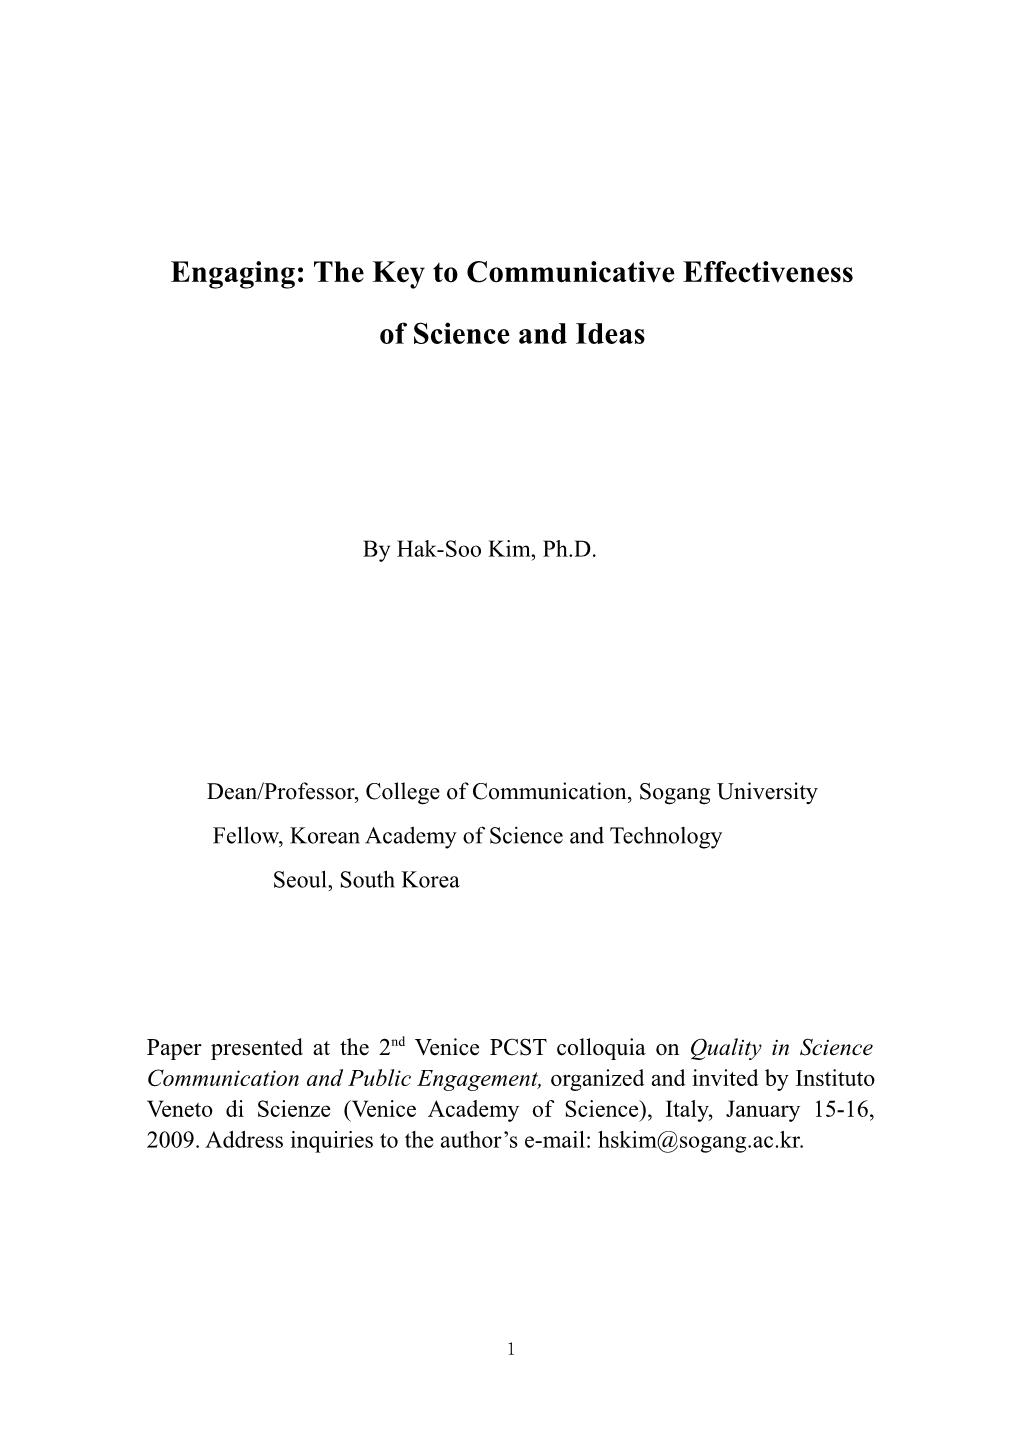 Engaging: the Key to Communicative Effectiveness of Ideas and Science